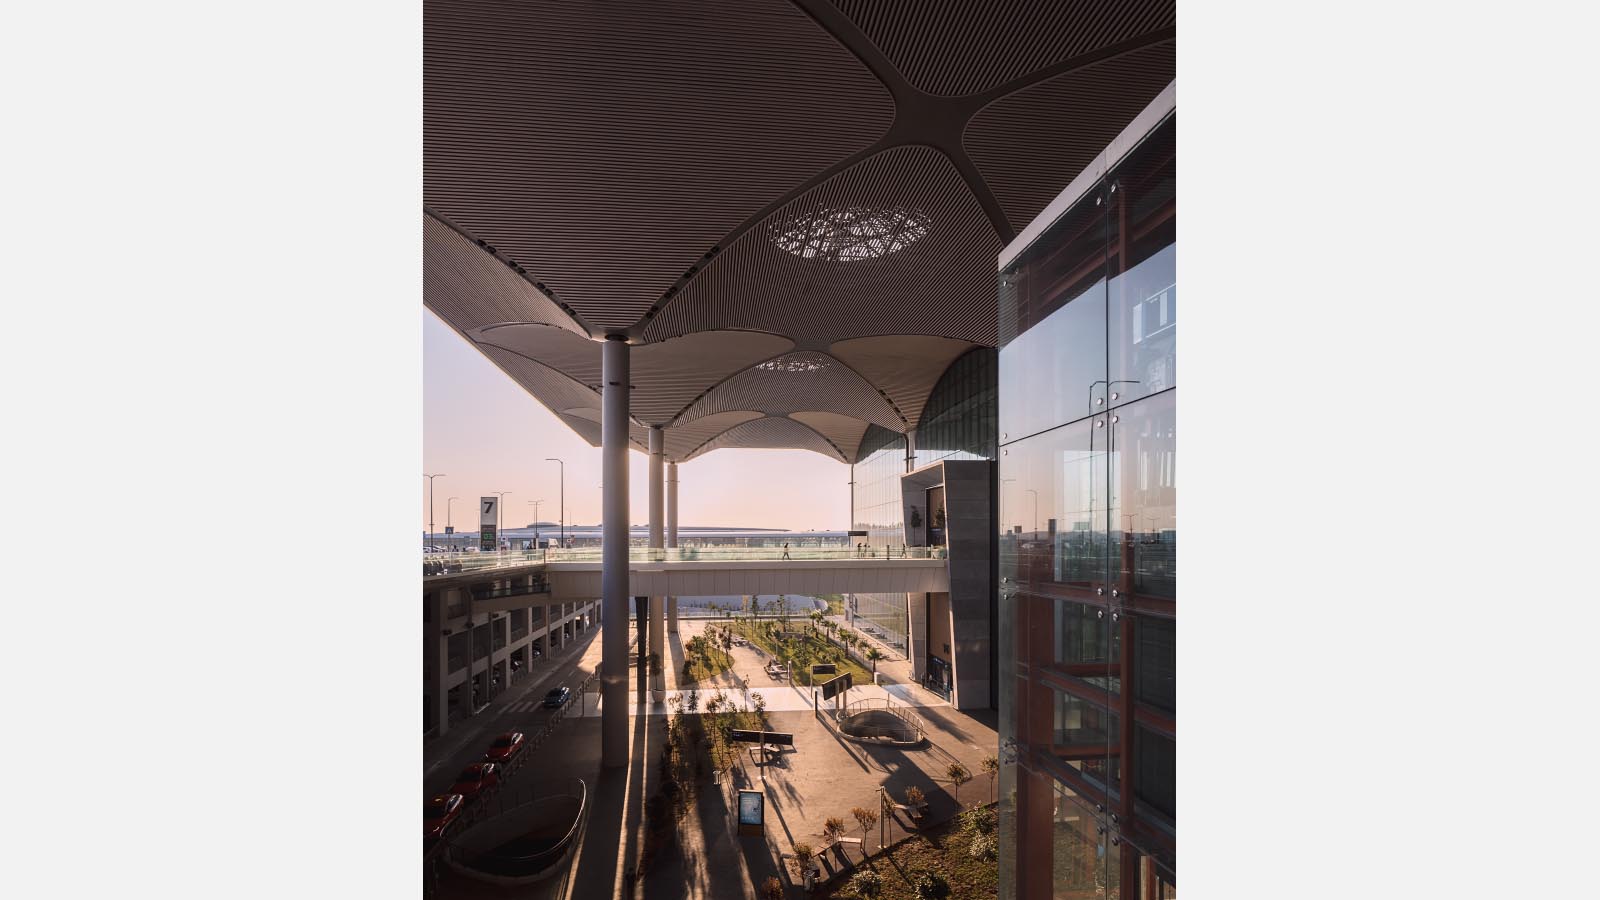 Intanbul Airport by Haptic Architects, Nordic and Grimshaw